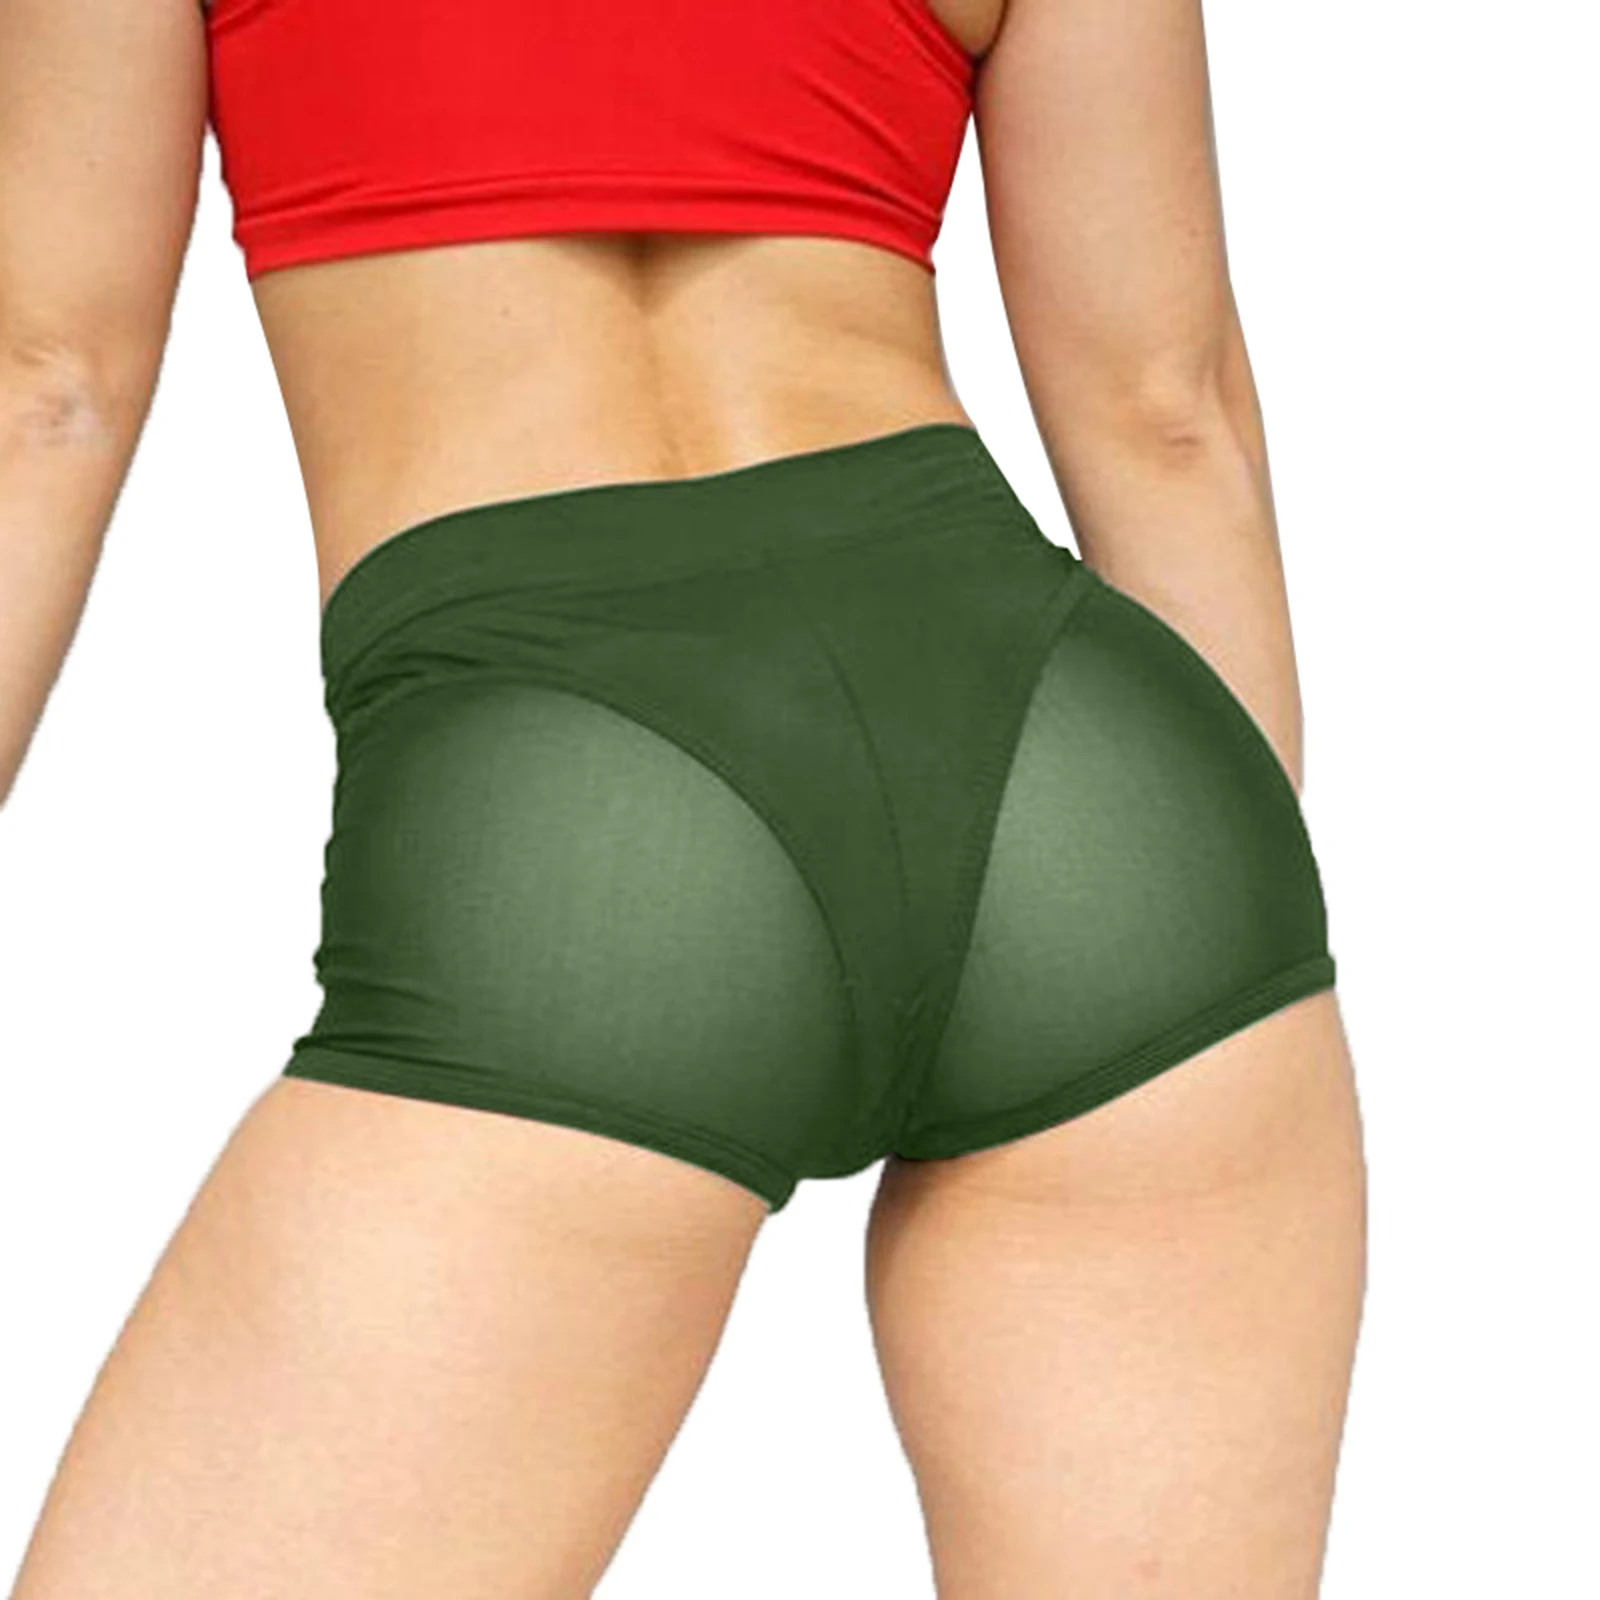 Women Sexy High Waist Workout Fitness Shorts Female Cheer Booty Dance Shorts See-through Mesh Patchwork Pole Dancing Clubwear gym shorts